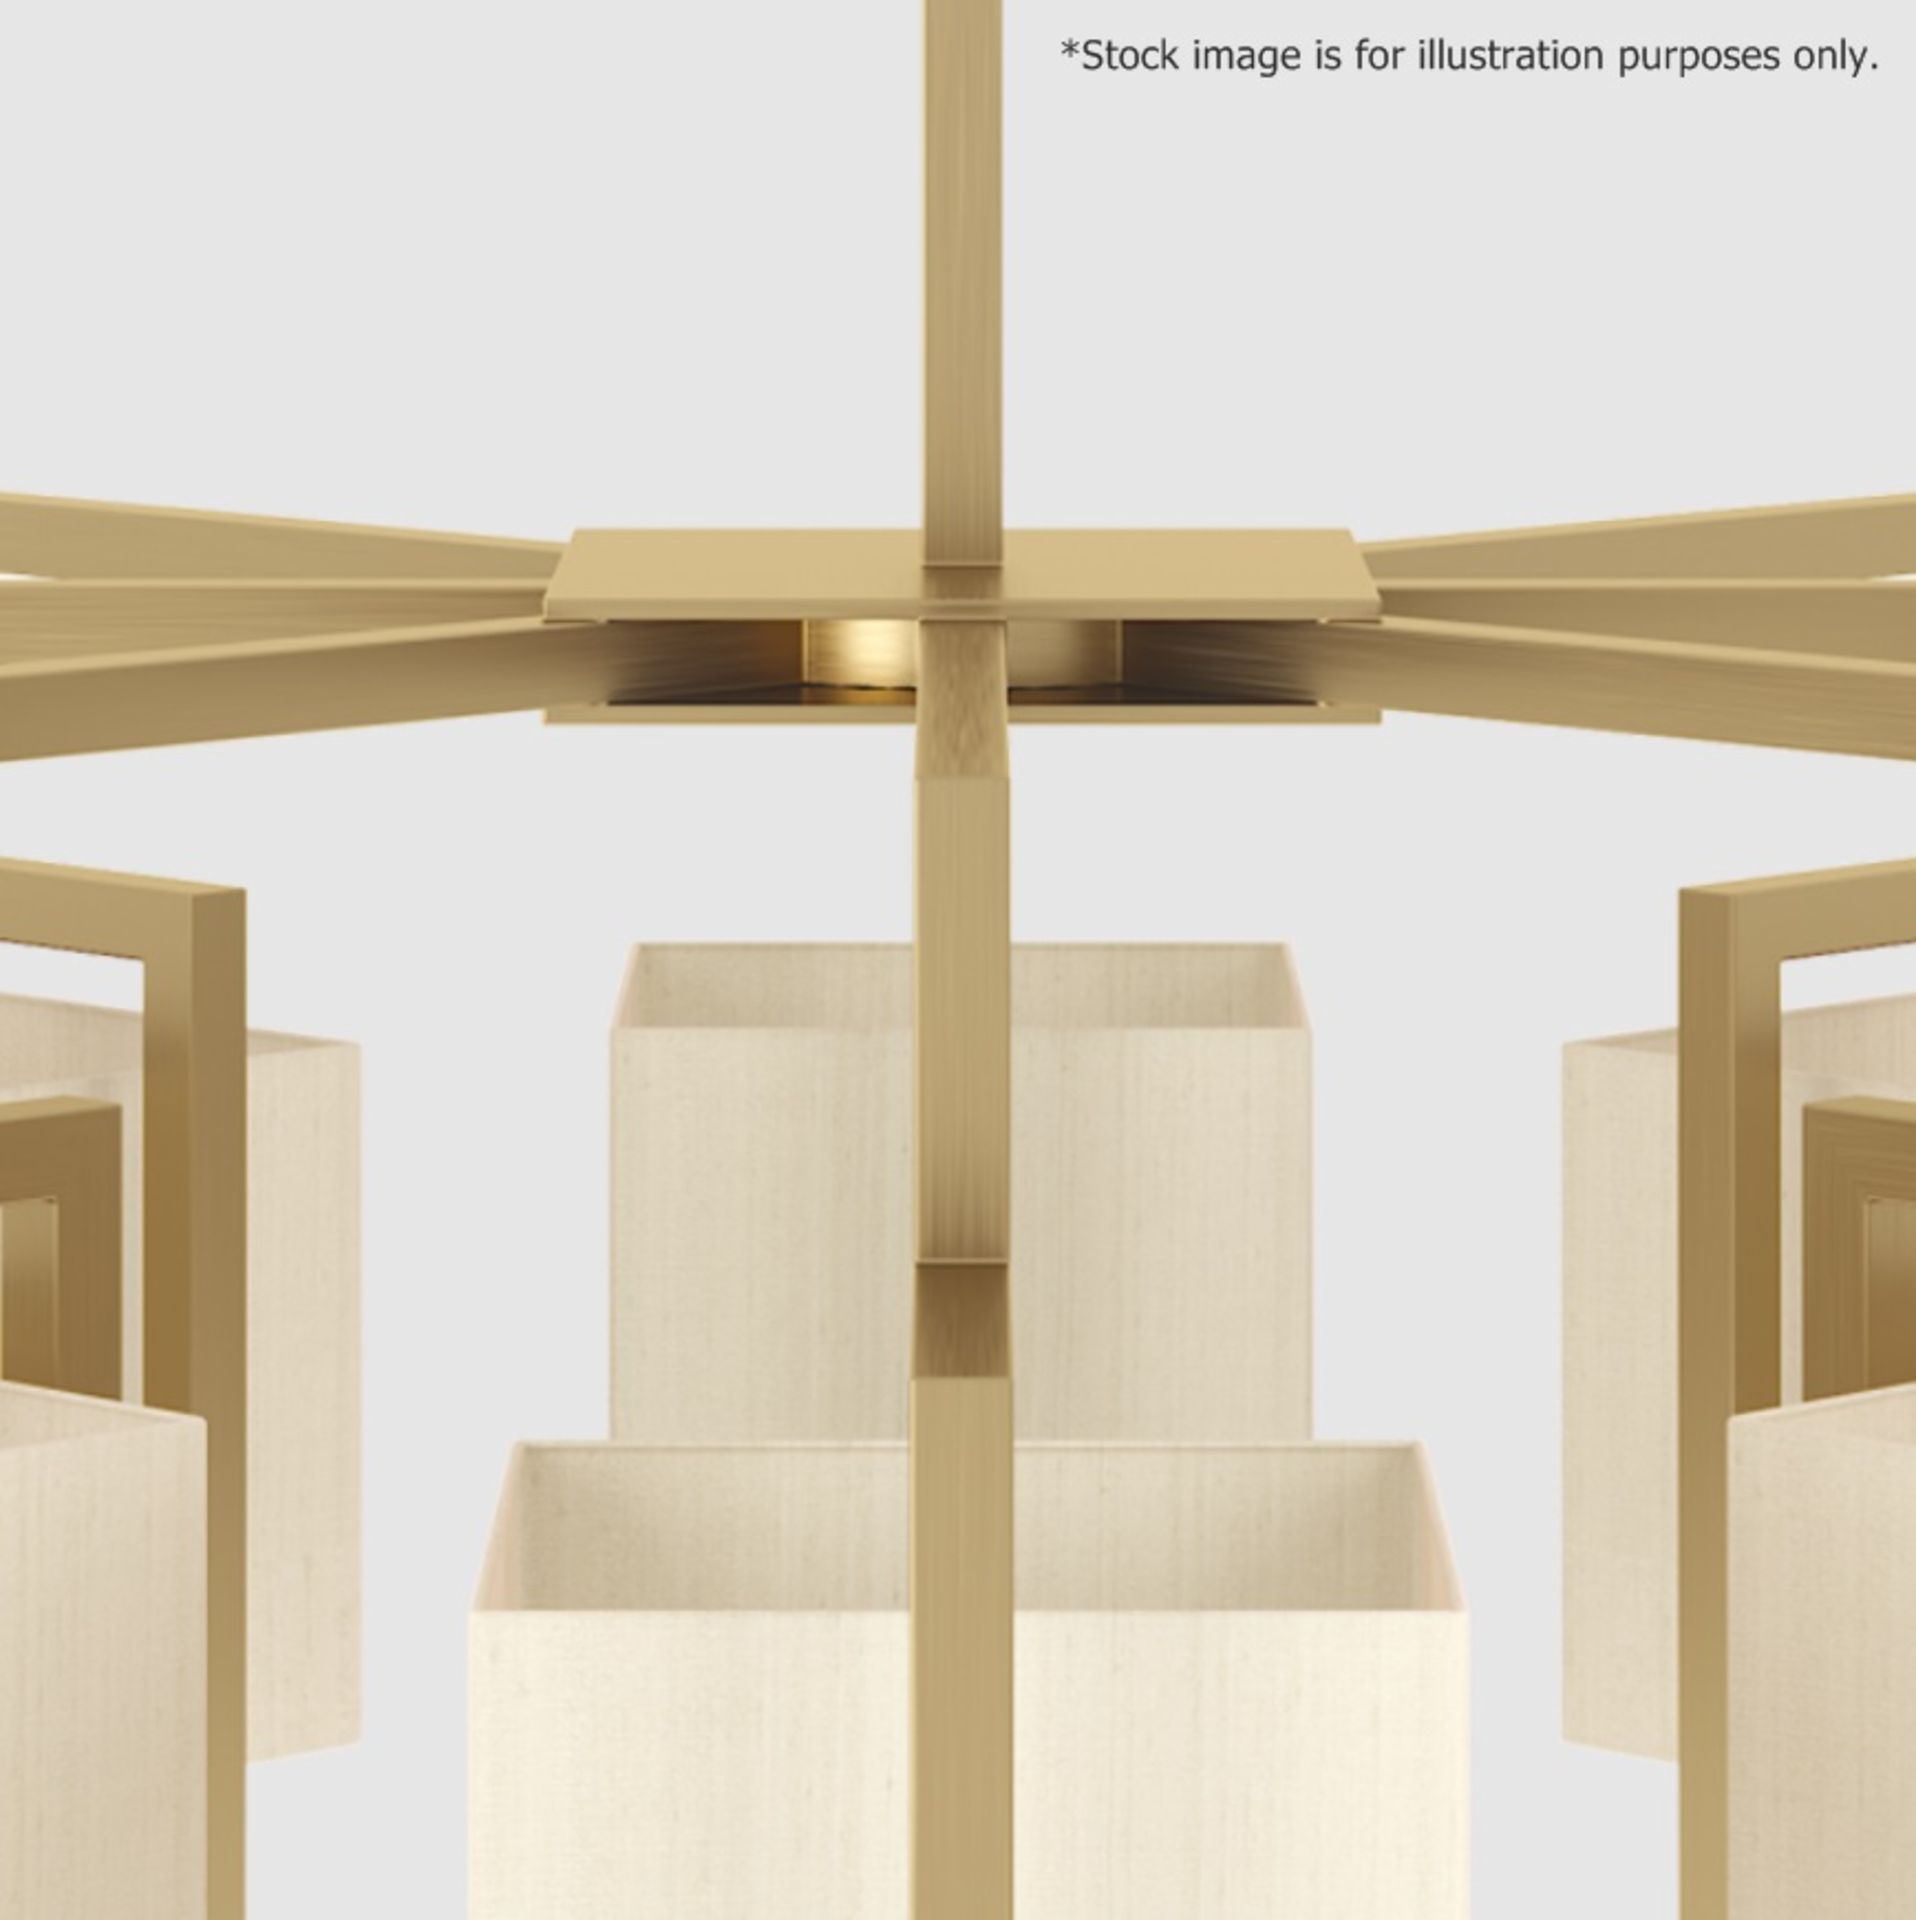 1 x FRATO 'DOMAIN' Designer 8-Light Ceiling Chandelier With Cubed Shades In Pulled-Silk - - Image 3 of 11